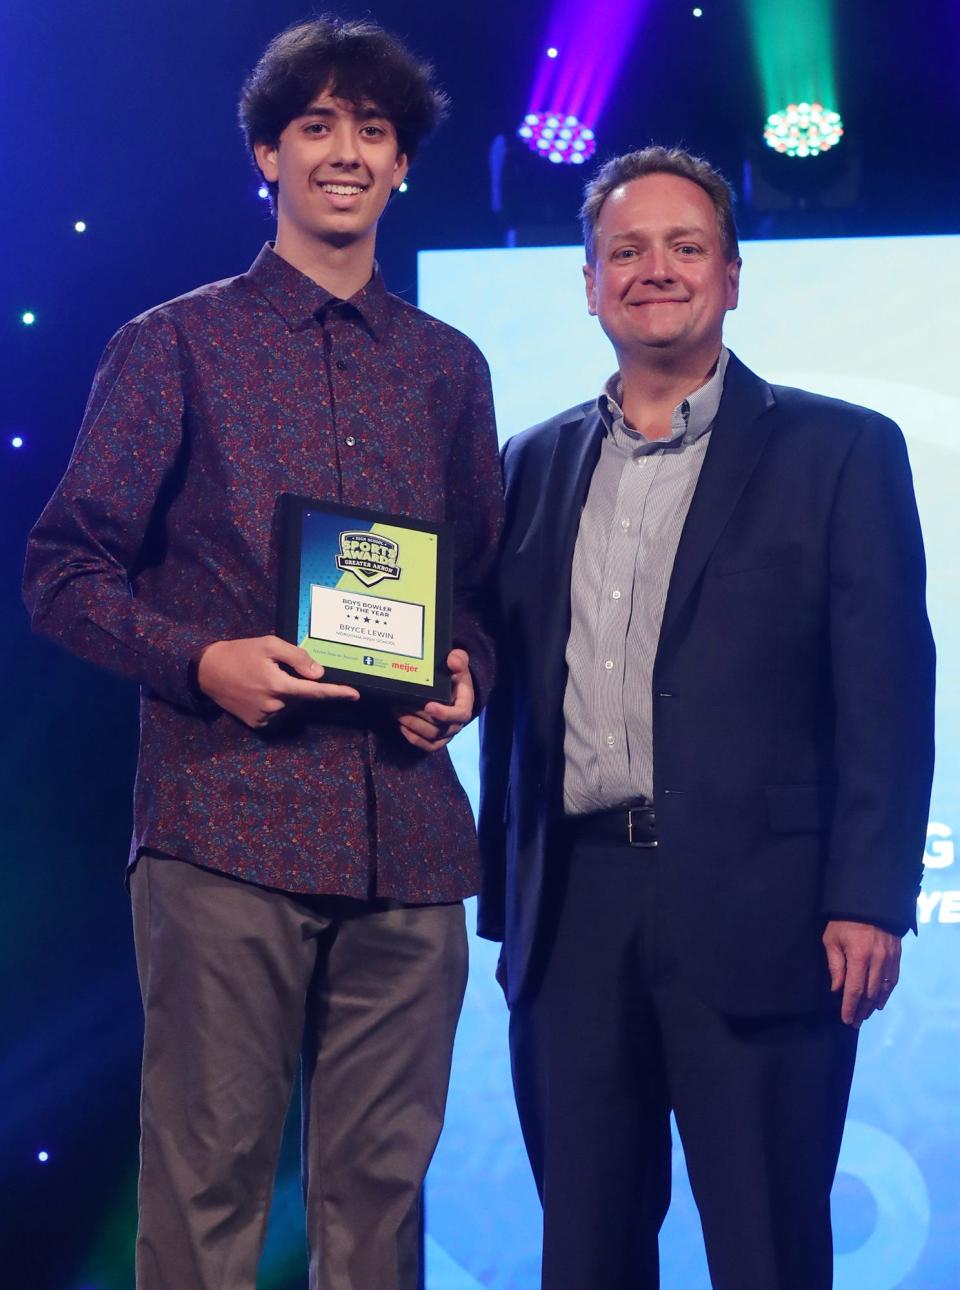 Nordonia High's Bryce Lewin Greater Akron Boys Bowling Player of the Year with Michael Shearer Akron Beacon Journal editor at the High School Sports All-Star Awards at the Civic Theatre in Akron on Friday.